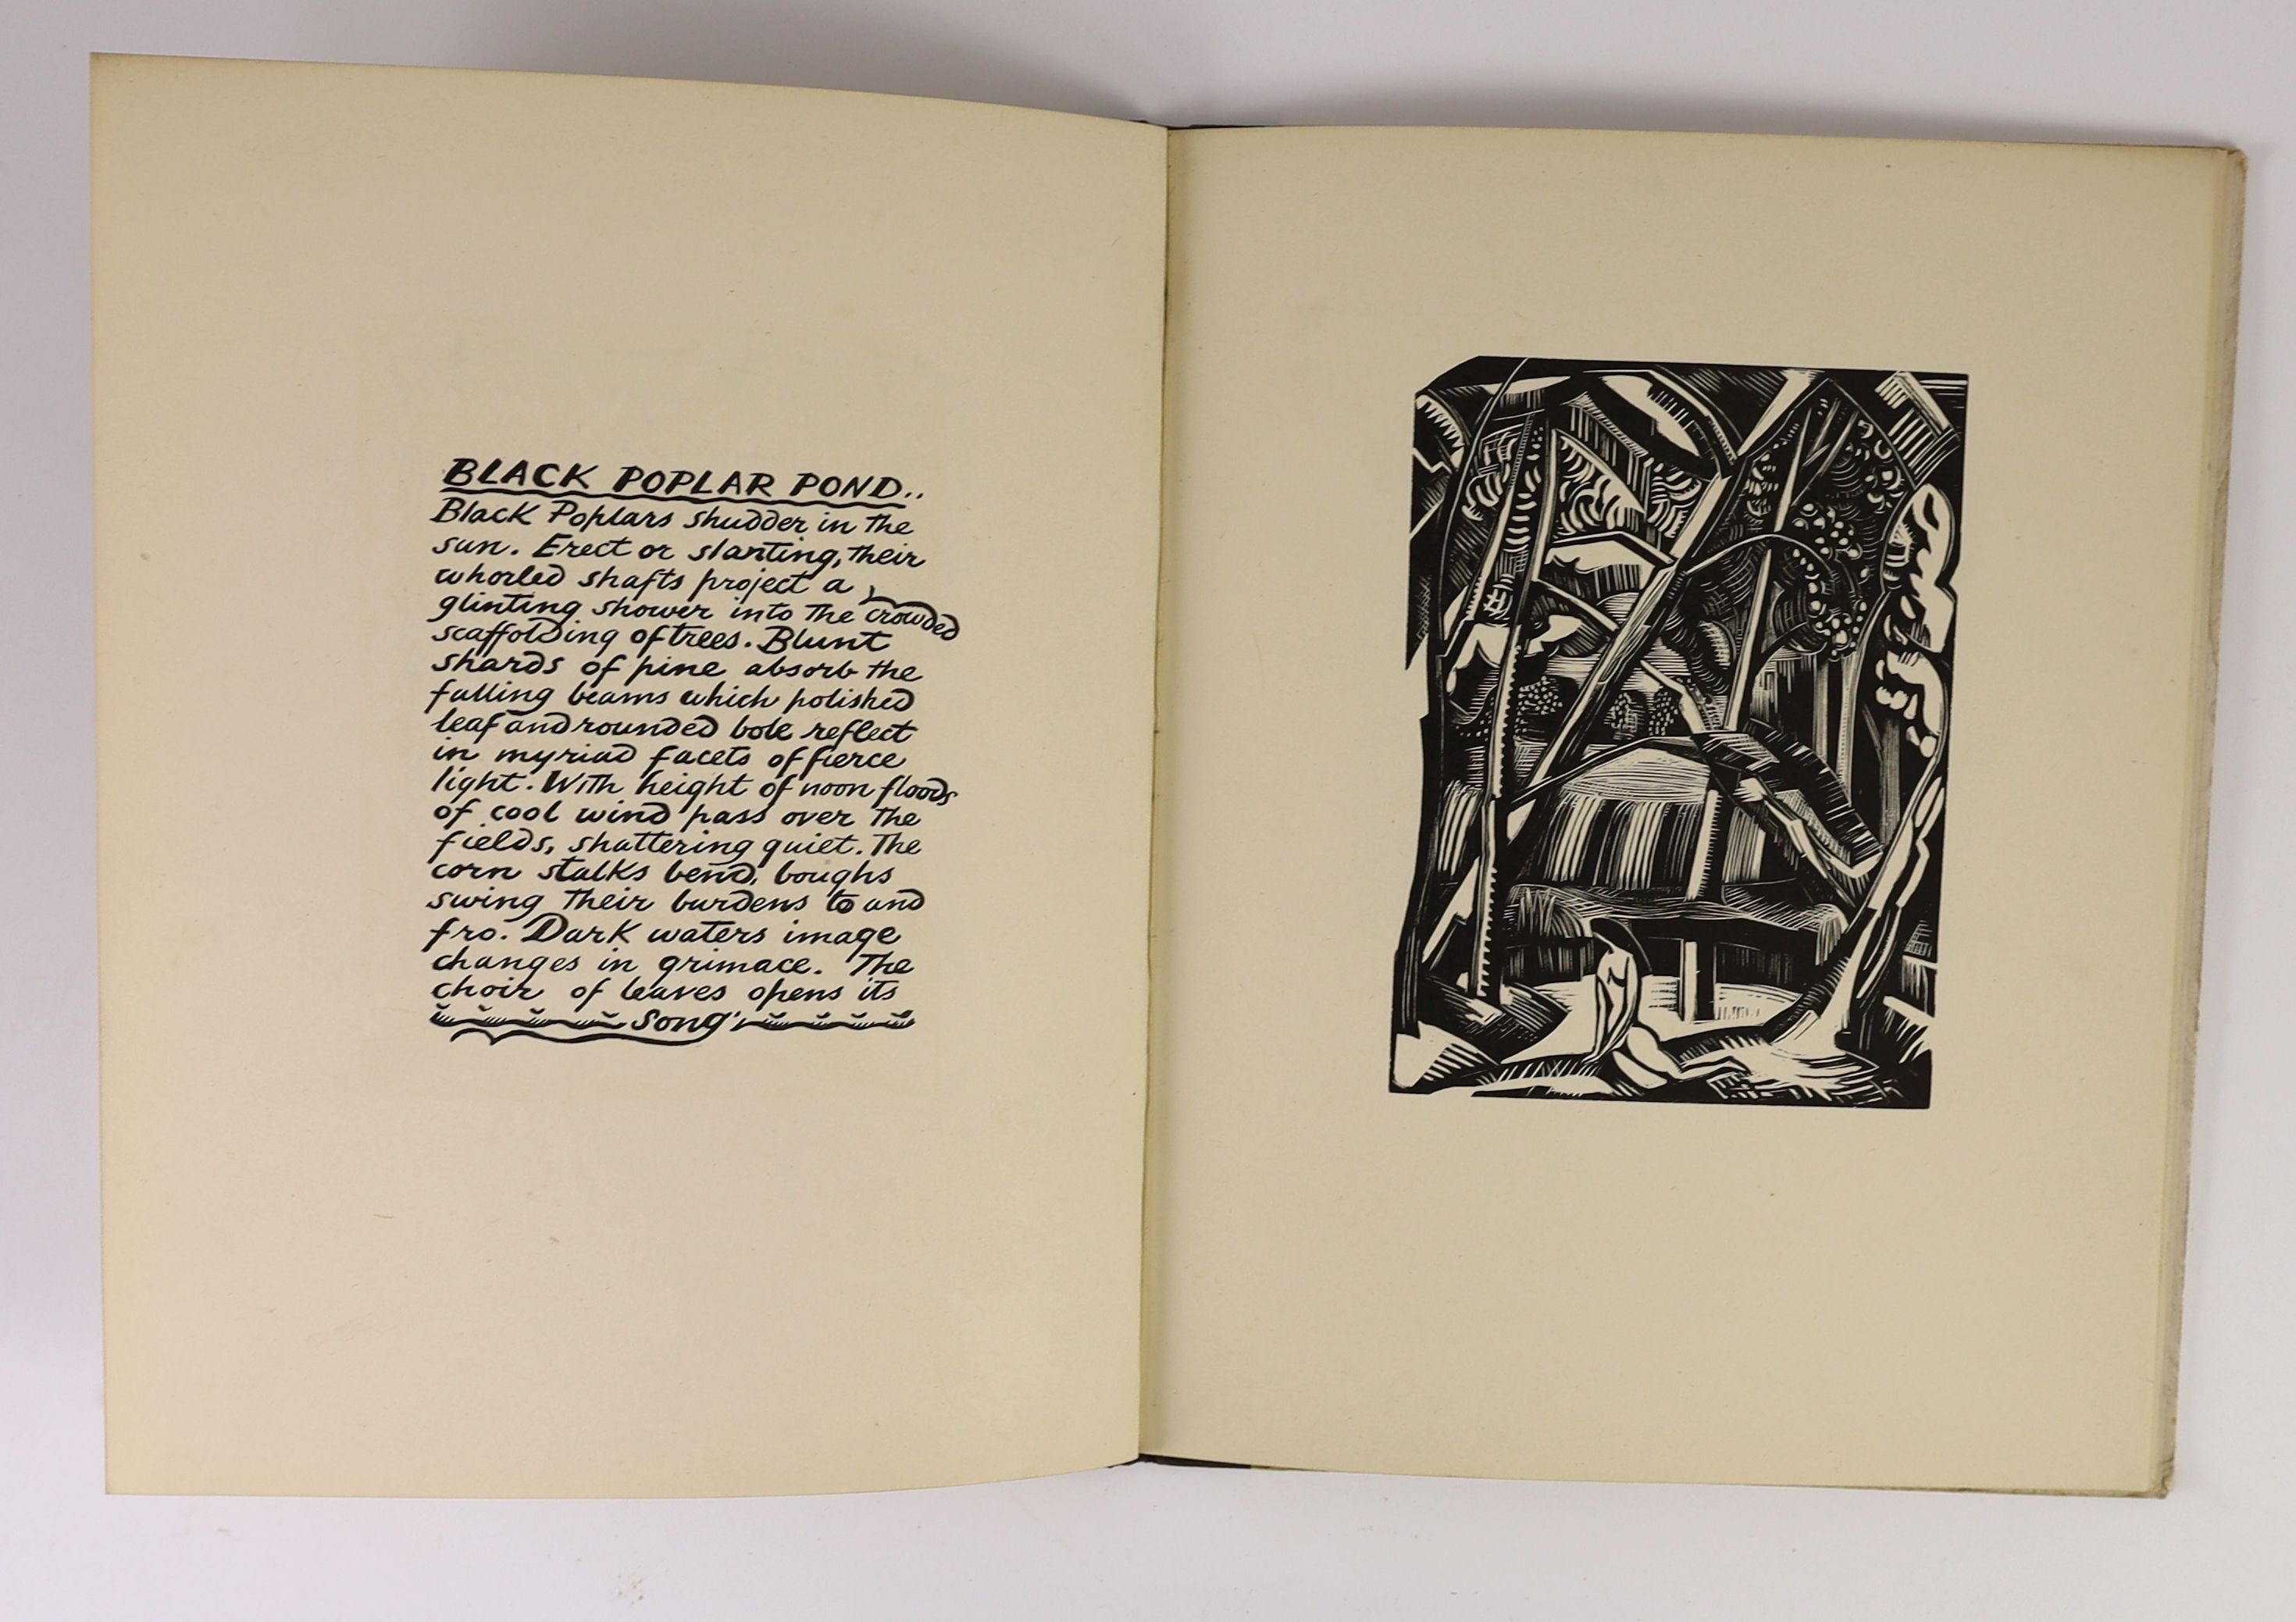 Nash, Paul - Places. 1st and limited edition, one of 210 copies. Complete with 7 full page woodcut illustrations plus large tailpiece. Publishers quarter cloth and illustrated and titled paper on board. Prelims complete